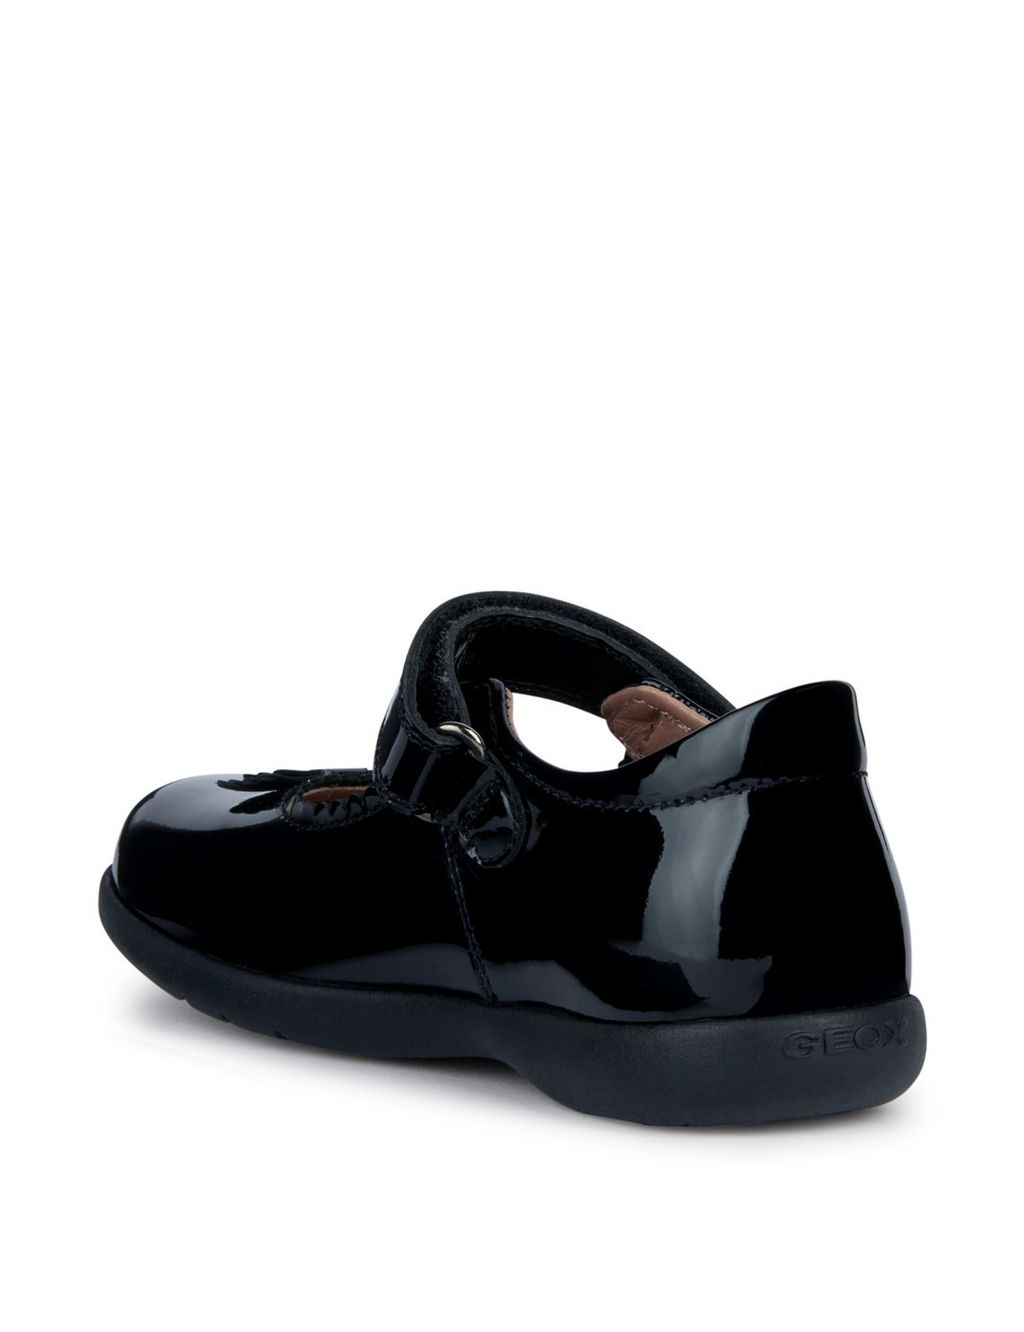 Kids' Patent Leather Riptape School Shoes (8½ Smal-12½ Small) | Geox | M&S